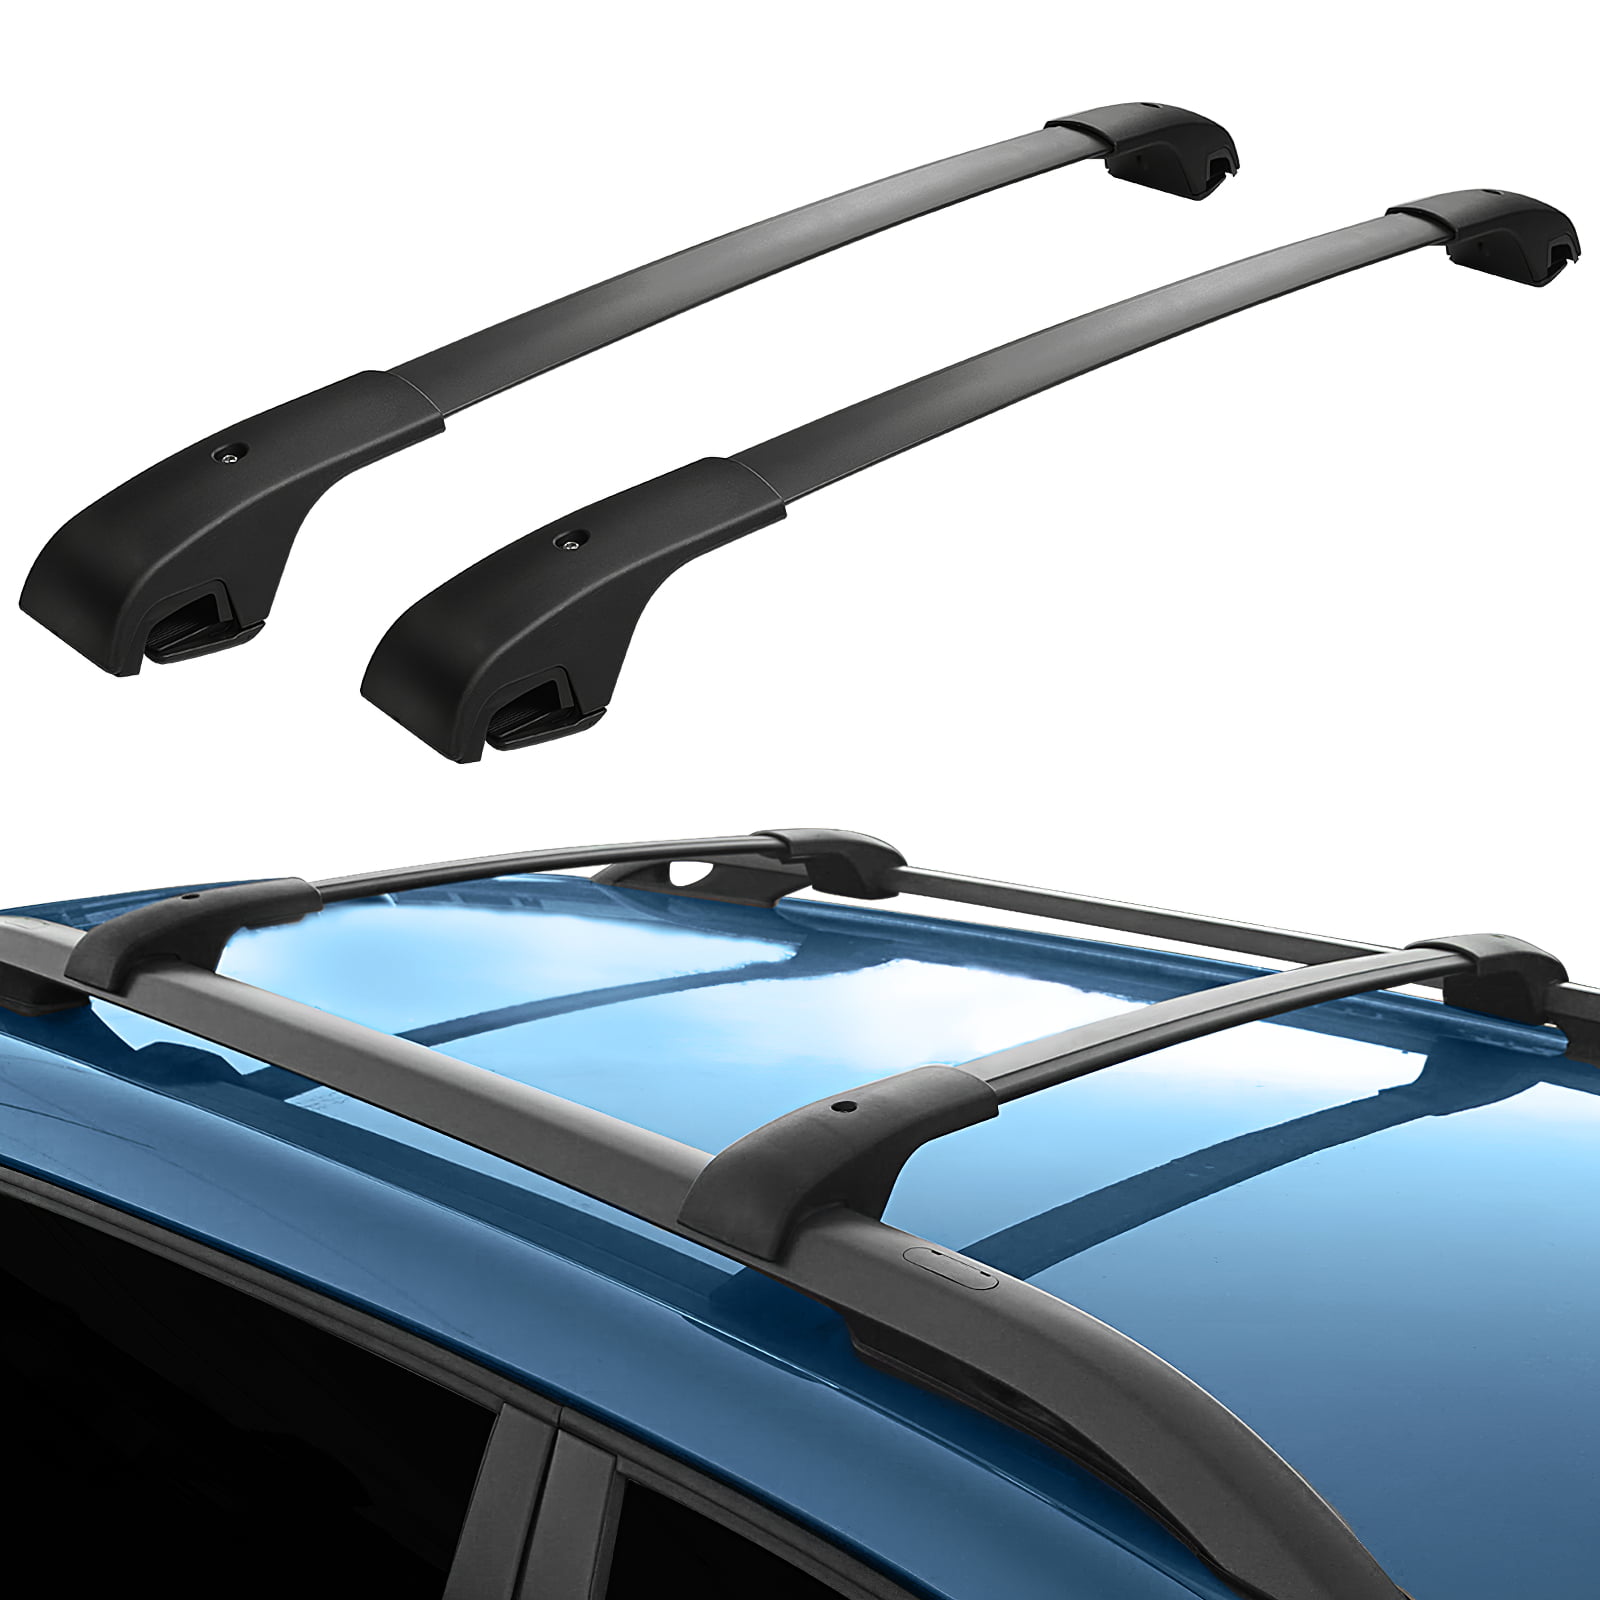 Roof Rack Cross Bars for 2014-2021 Jeep Cherokee Aluminum Luggage Carrier Replacement - Walmart 2014 Jeep Grand Cherokee Roof Rack Cross Bars